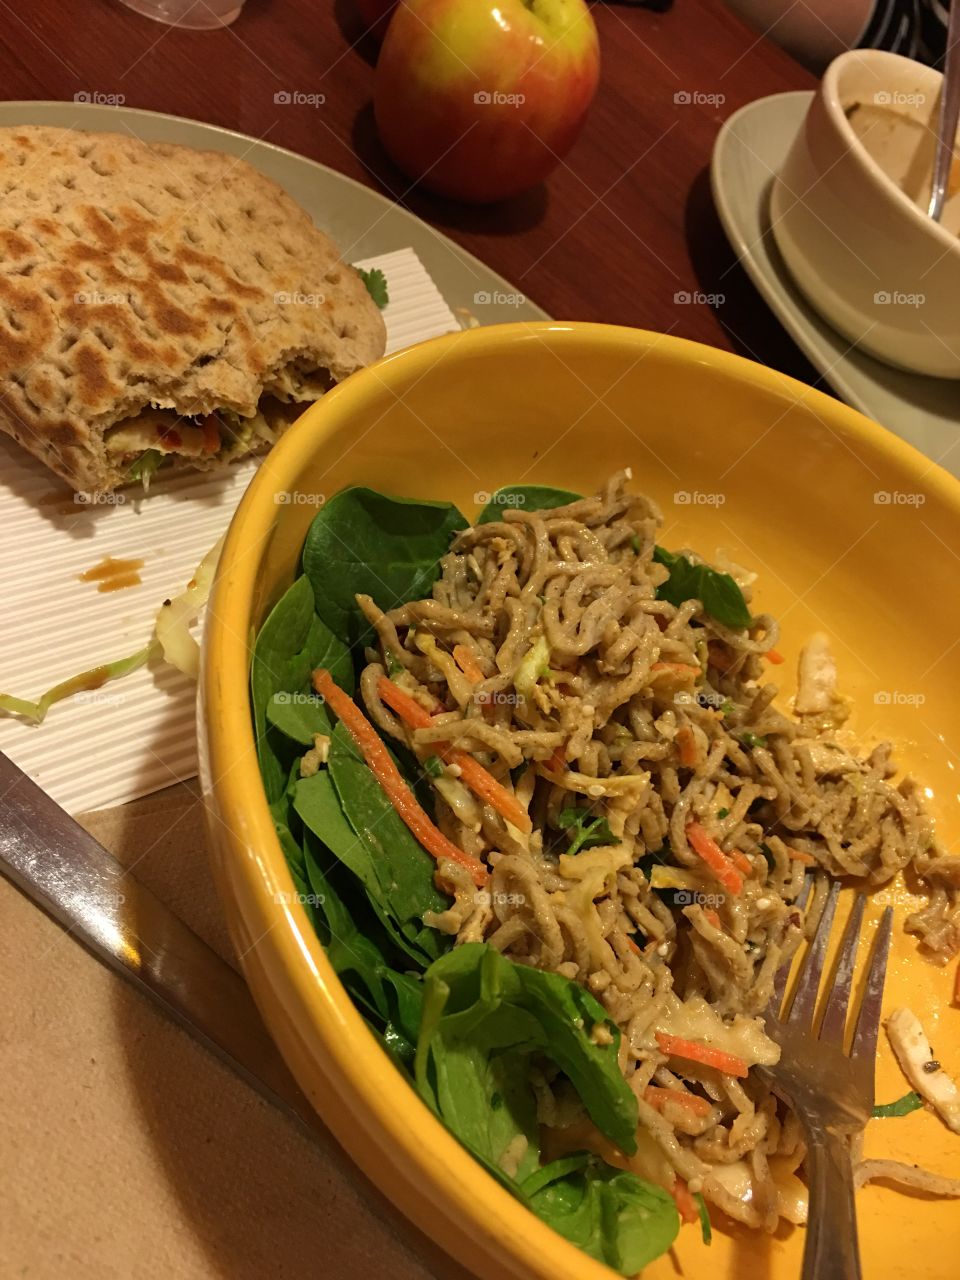 Healthy Lunch..Soba Noodle/Spinach/Chicken salad and Tai chicken on flatbread